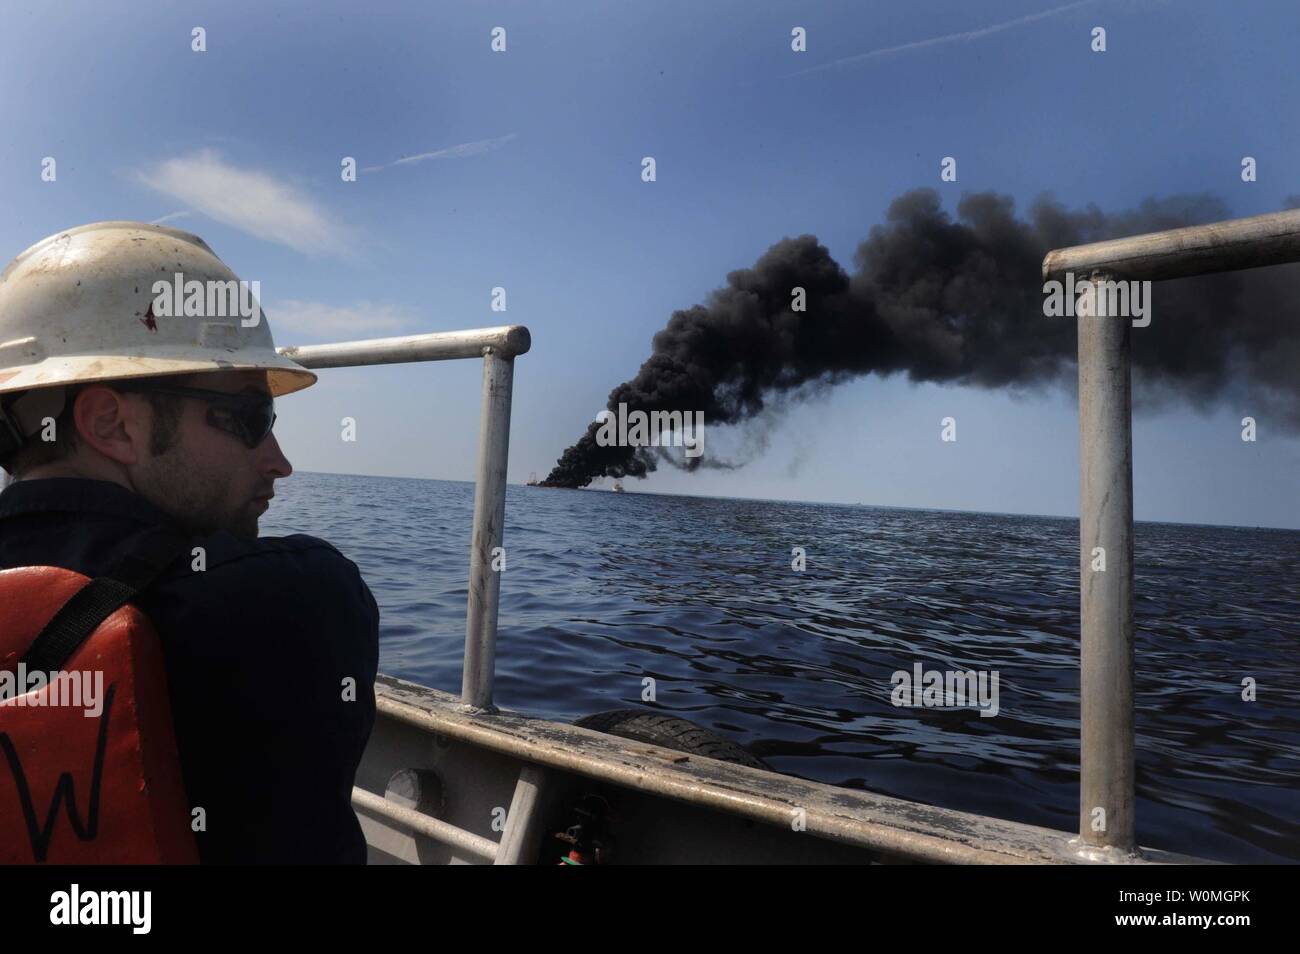 Adam Shaw, a Louisiana oilfield diver assigned to the Premier Explorer, performs a surveillance mission during a controlled fire of the oil-covered waters in the Gulf of Mexico, May 7. The U.S. Coast Guard working in partnership with BP PLC, local residents, and other federal agencies is conducting the Òin situ burnsÓ to aid in preventing the spread of oil following last month's explosion on Mobile Offshore Drilling Unit Deepwater Horizon. UPI/Jeffery Tilghman Williams/DOD Stock Photo